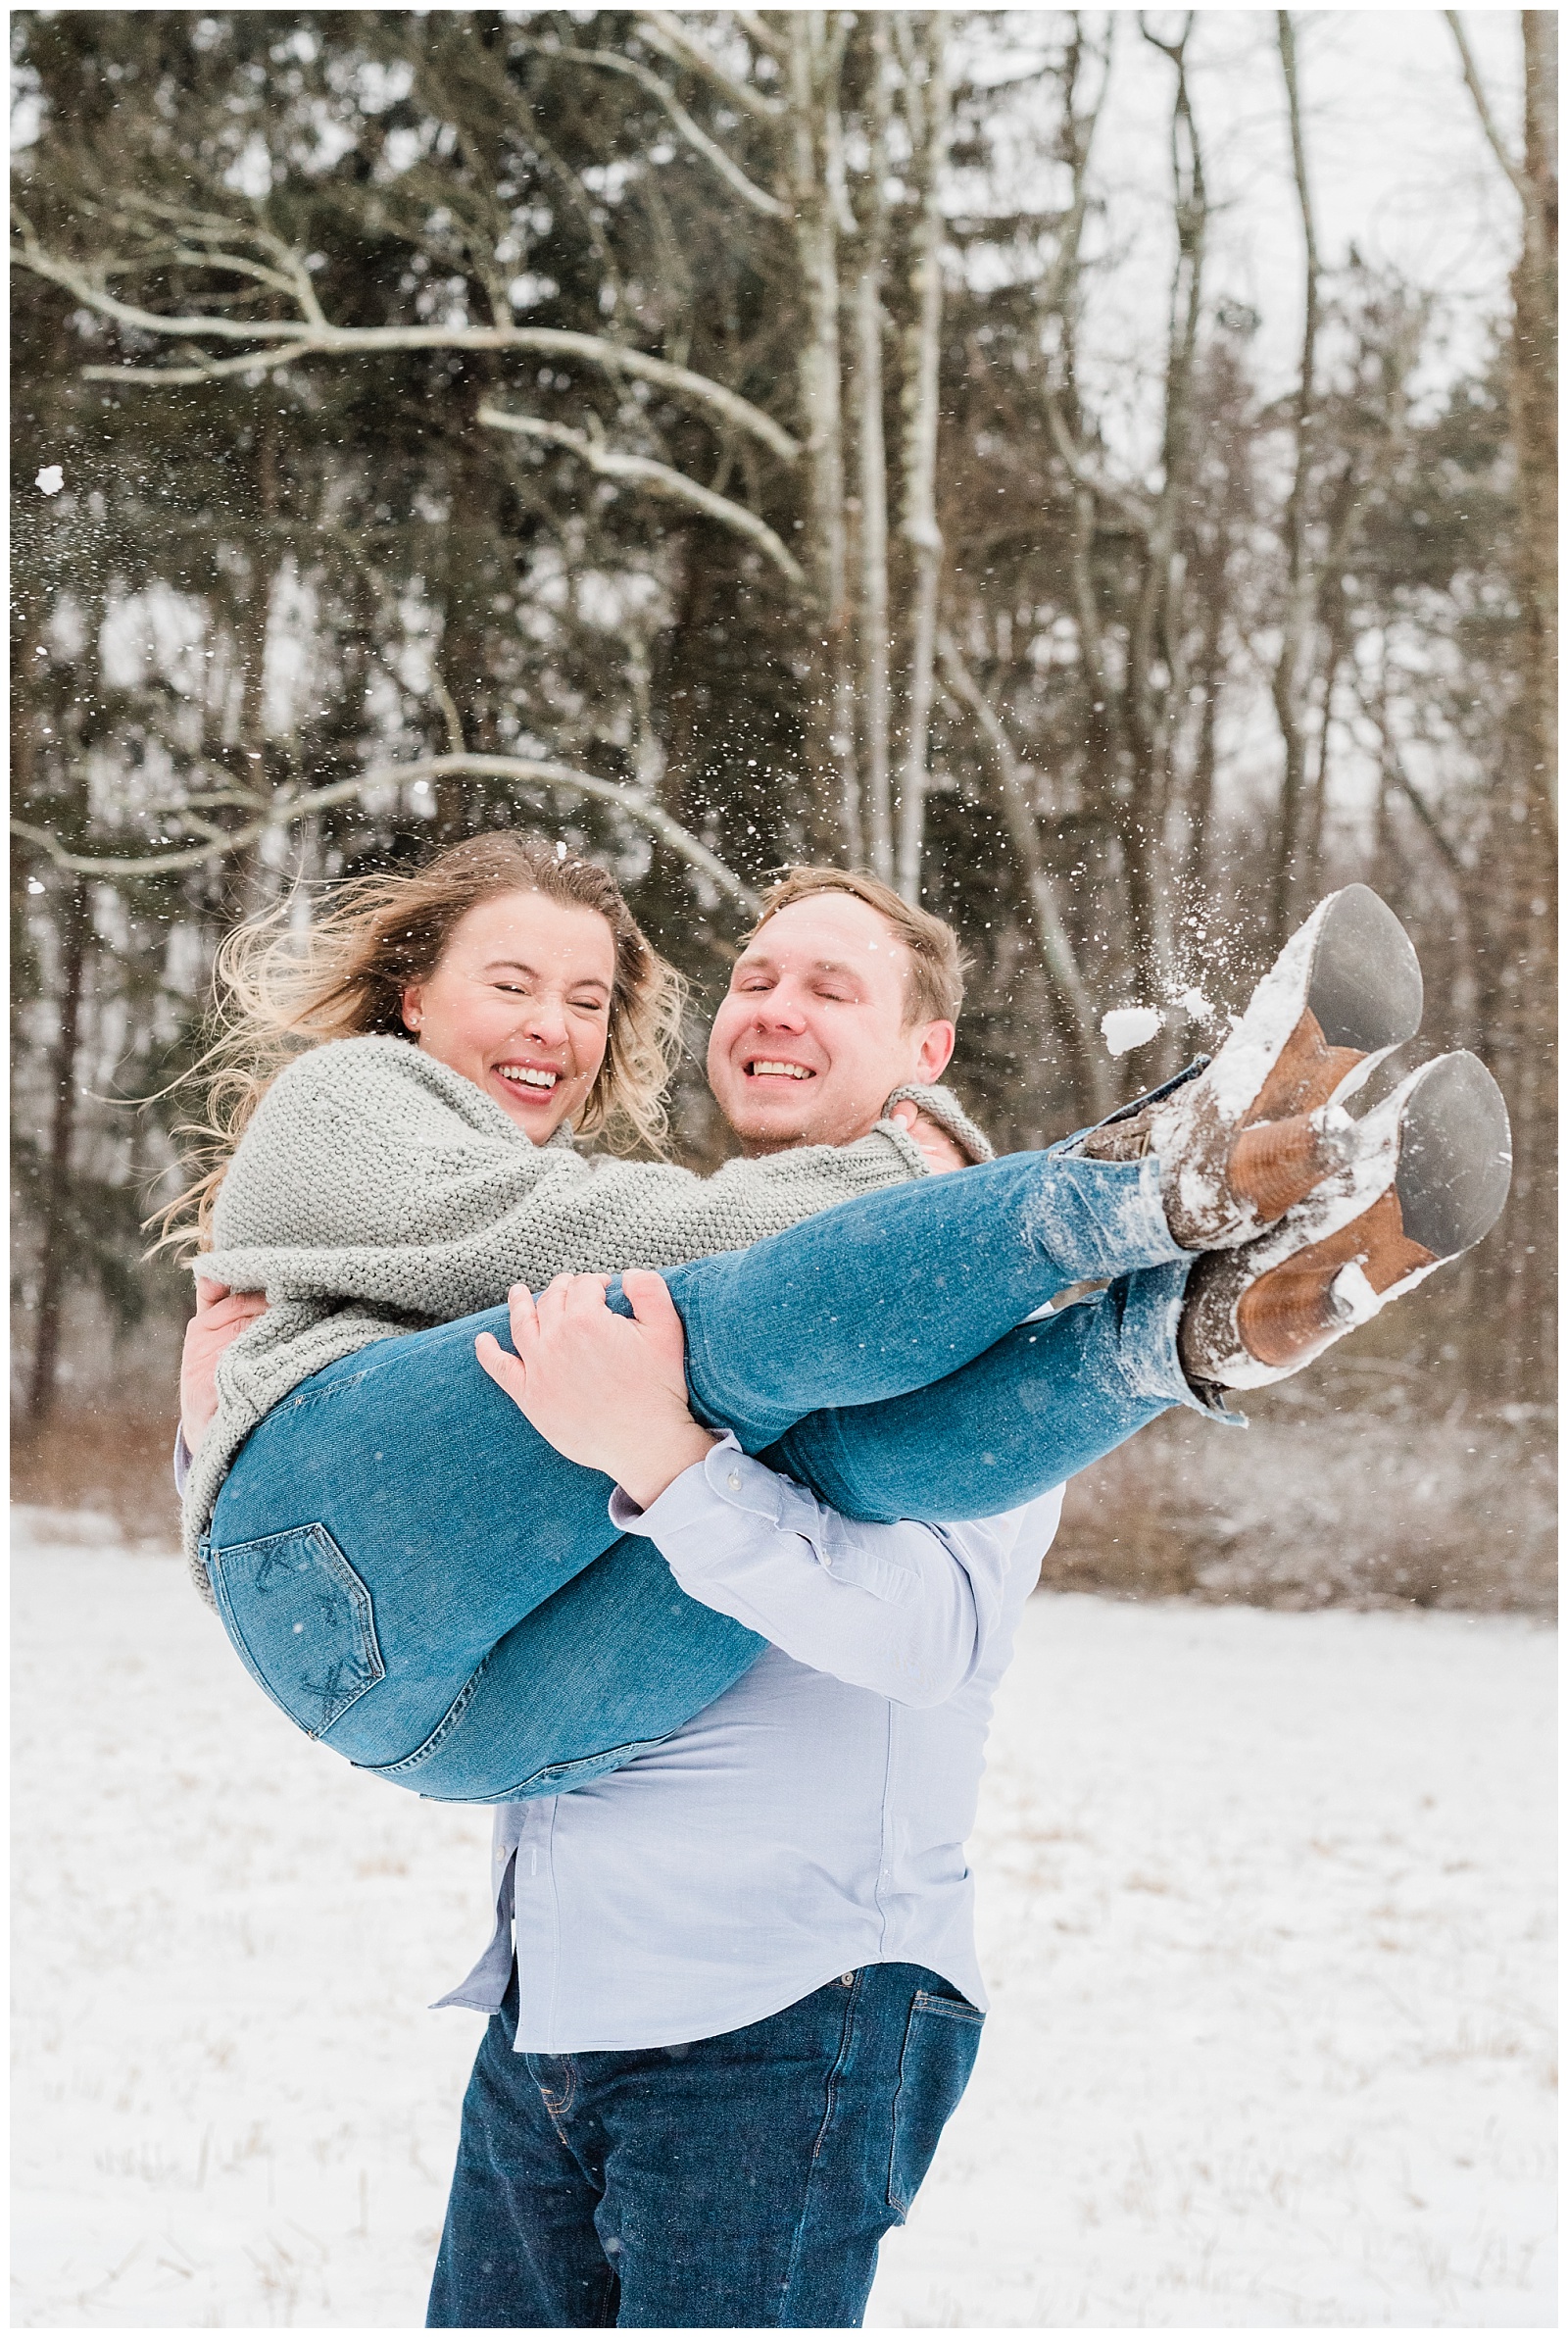 New Jersey Engagement Session, Snowy, Winter, Cozy, Session, Wedding Photographer, Cross Estate Gardens, Snow, Wintry, Light and Airy, Free, Fun, Wild, Joyful, Lift